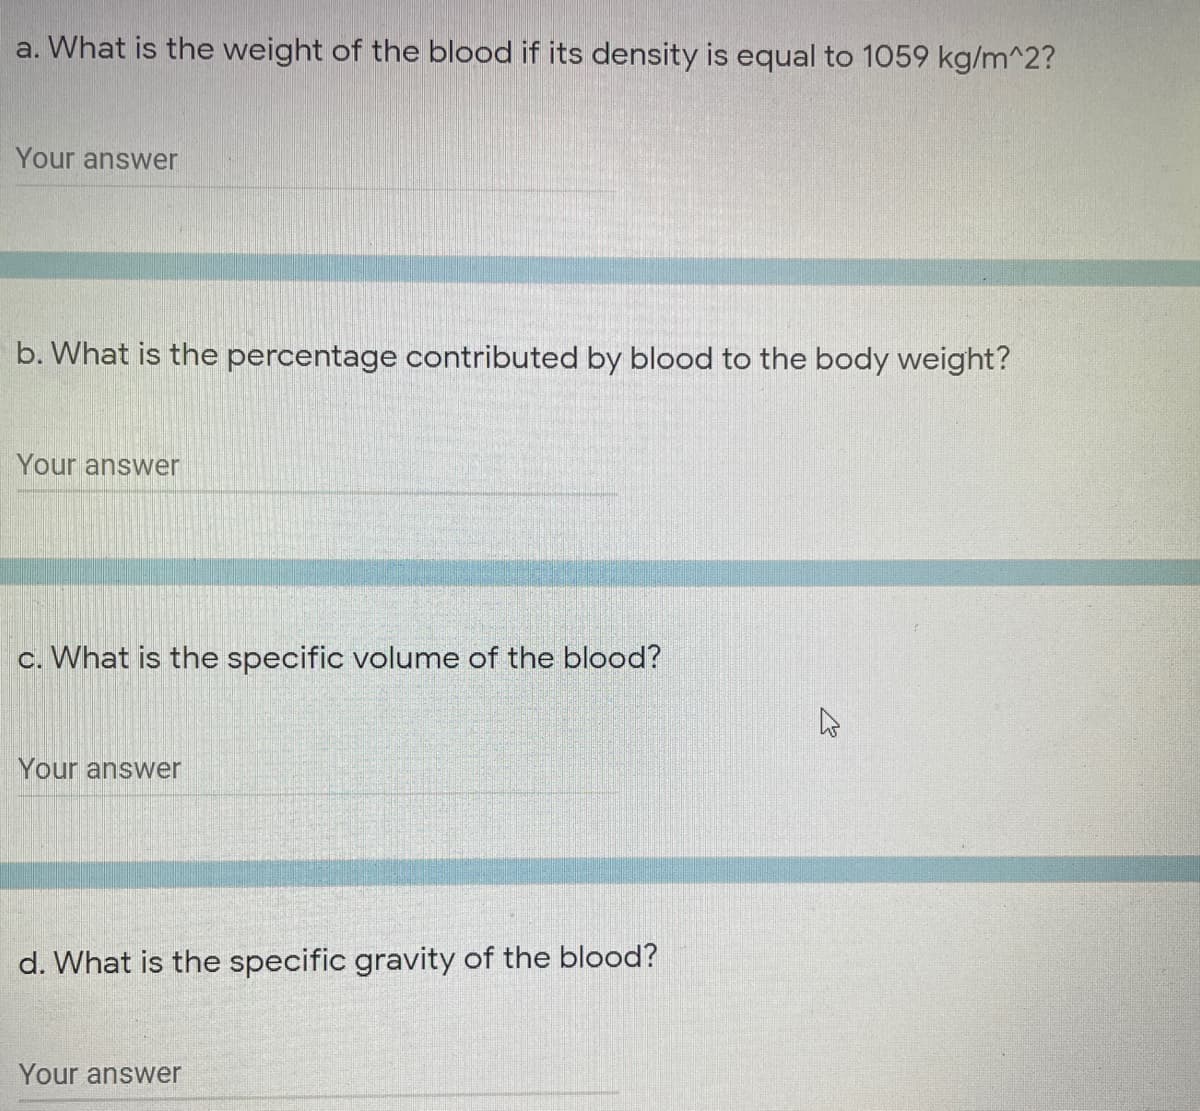 a. What is the weight of the blood if its density is equal to 1059 kg/m^2?
Your answer
b. What is the percentage contributed by blood to the body weight?
Your answer
c. What is the specific volume of the blood?
Your answer
d. What is the specific gravity of the blood?
Your answer
